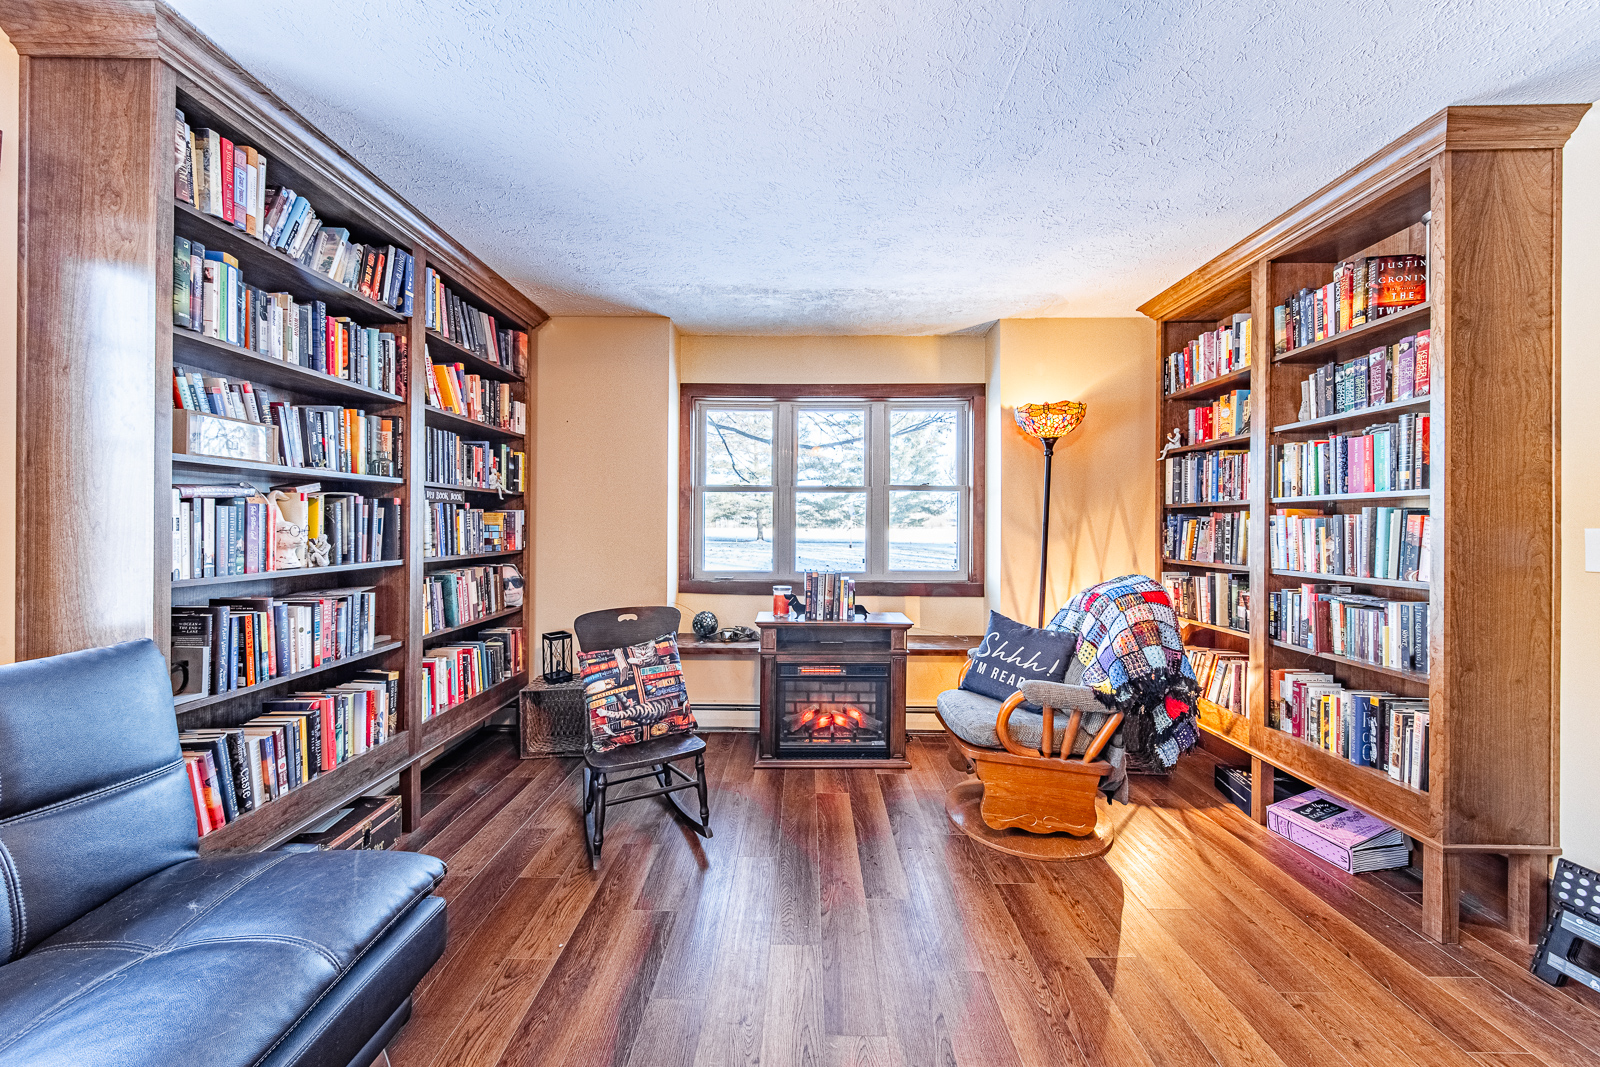 Lafayette home's living room elegantly transformed into a serene mini library space.